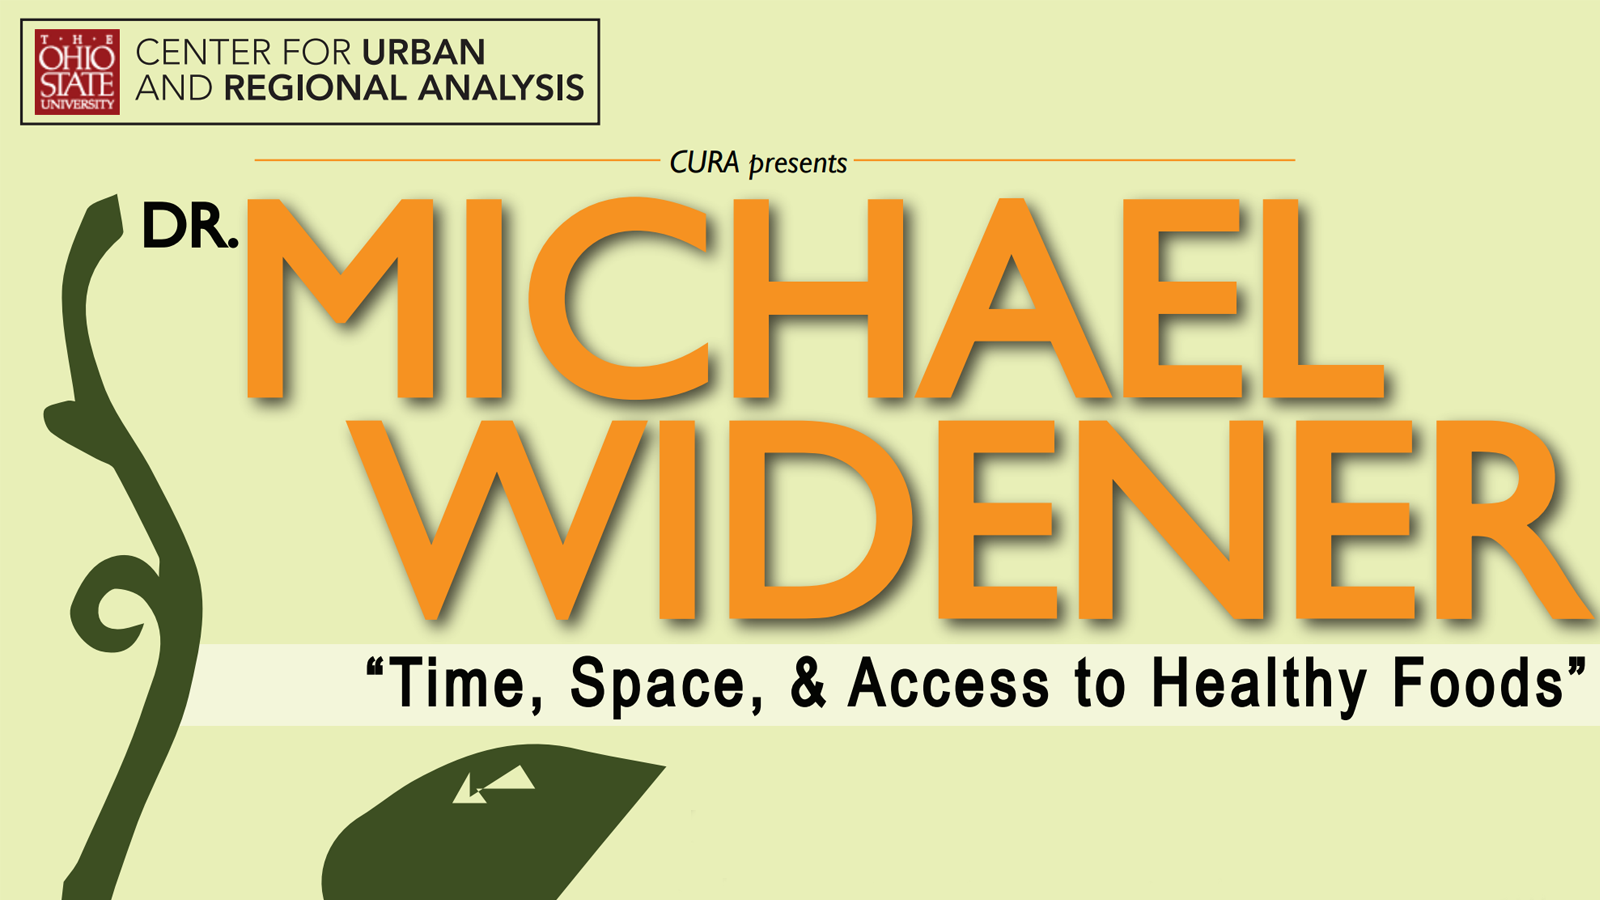 Flyer for event with Dr. Michael Widener